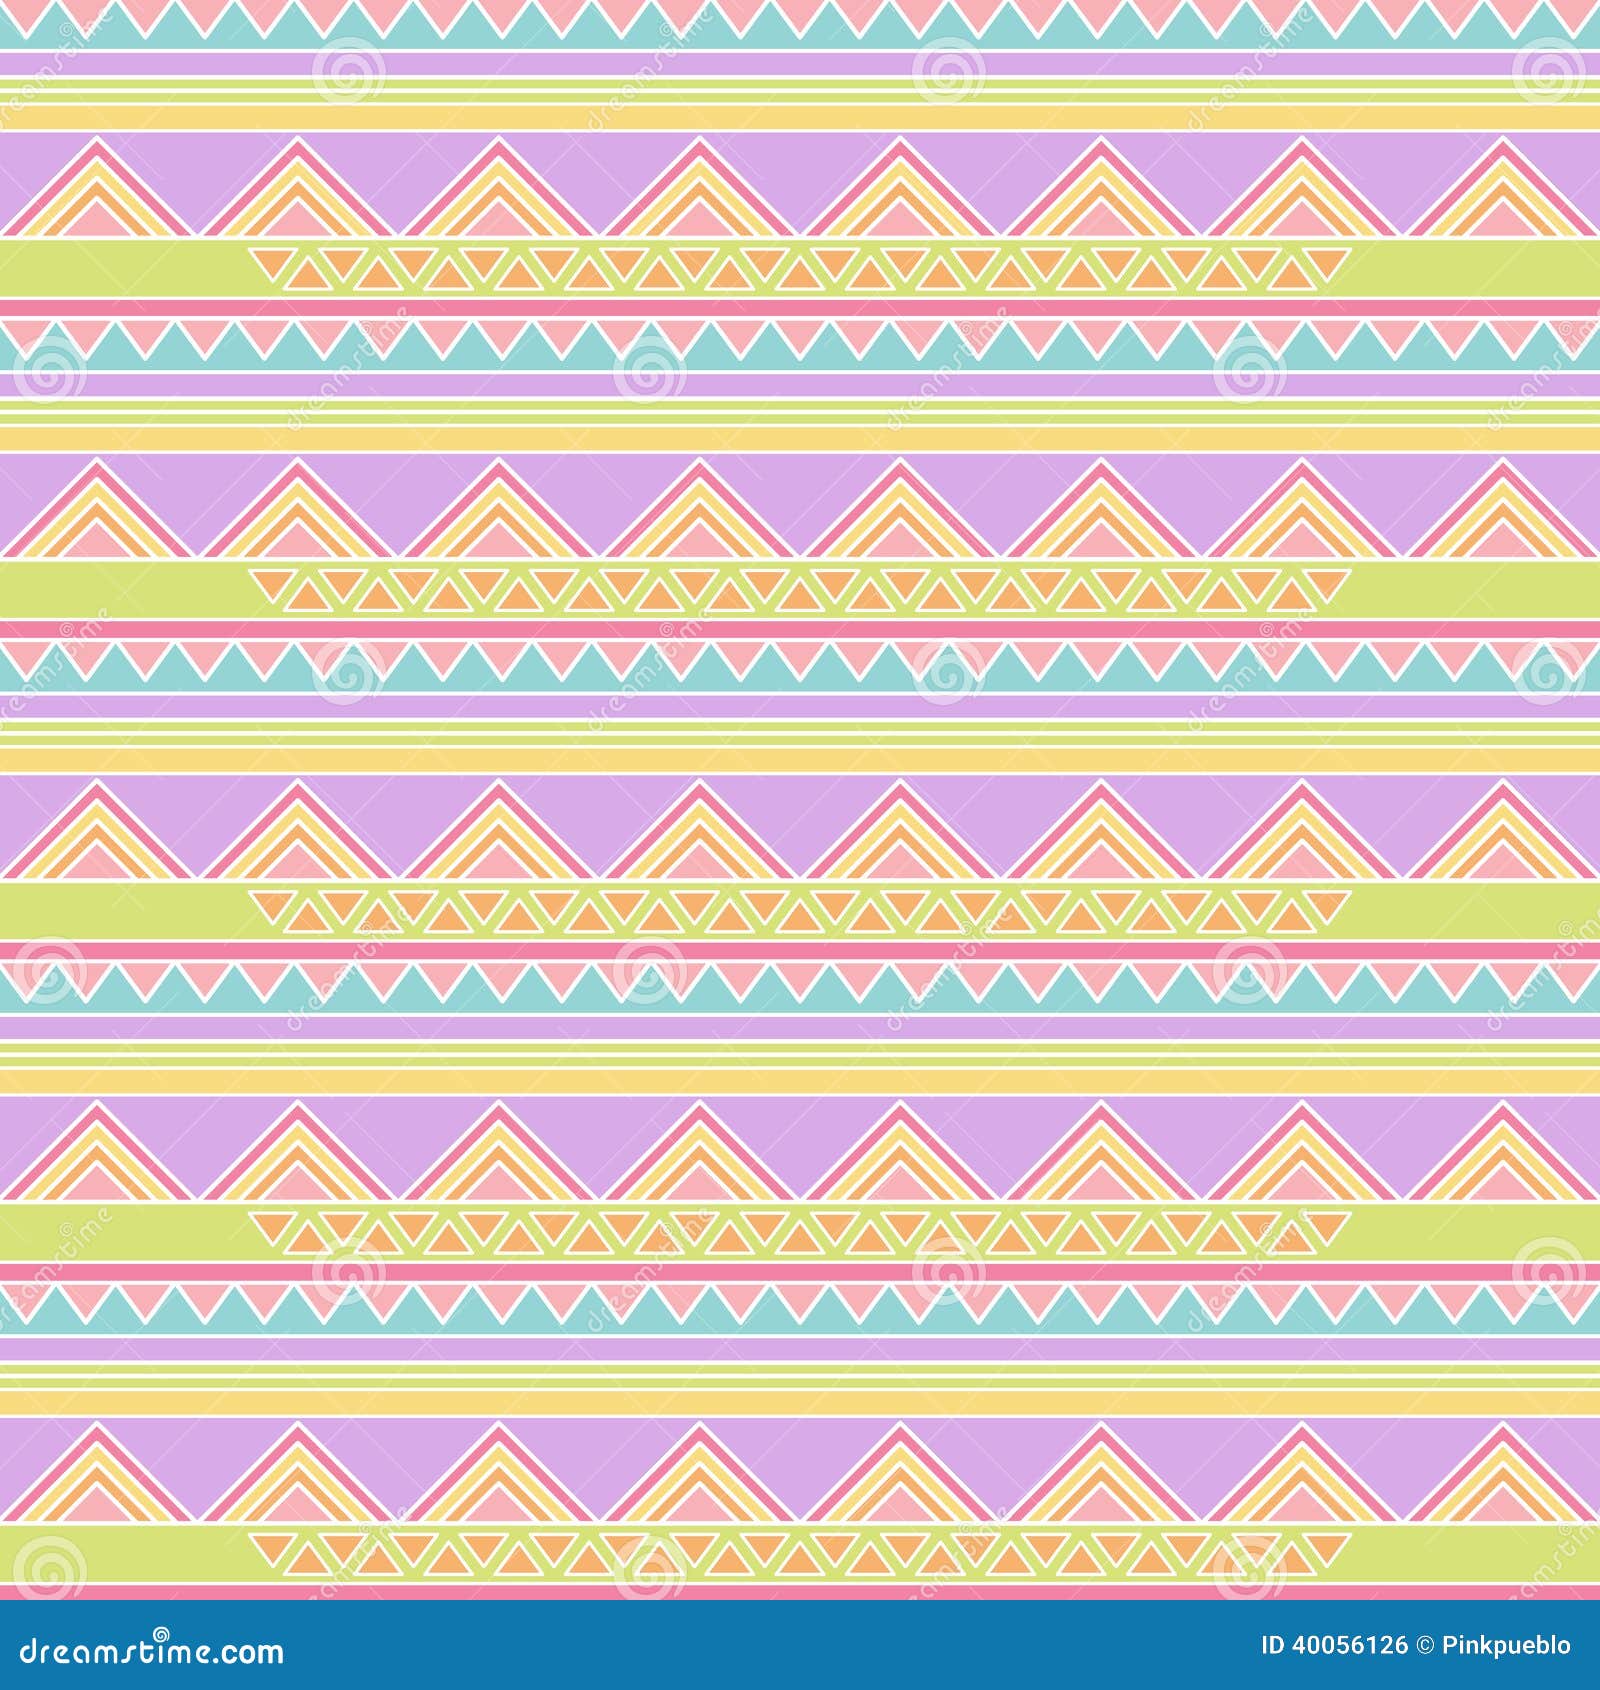 Seamless Tileable Vector Background in Pastel Tribal Style Stock Vector ...